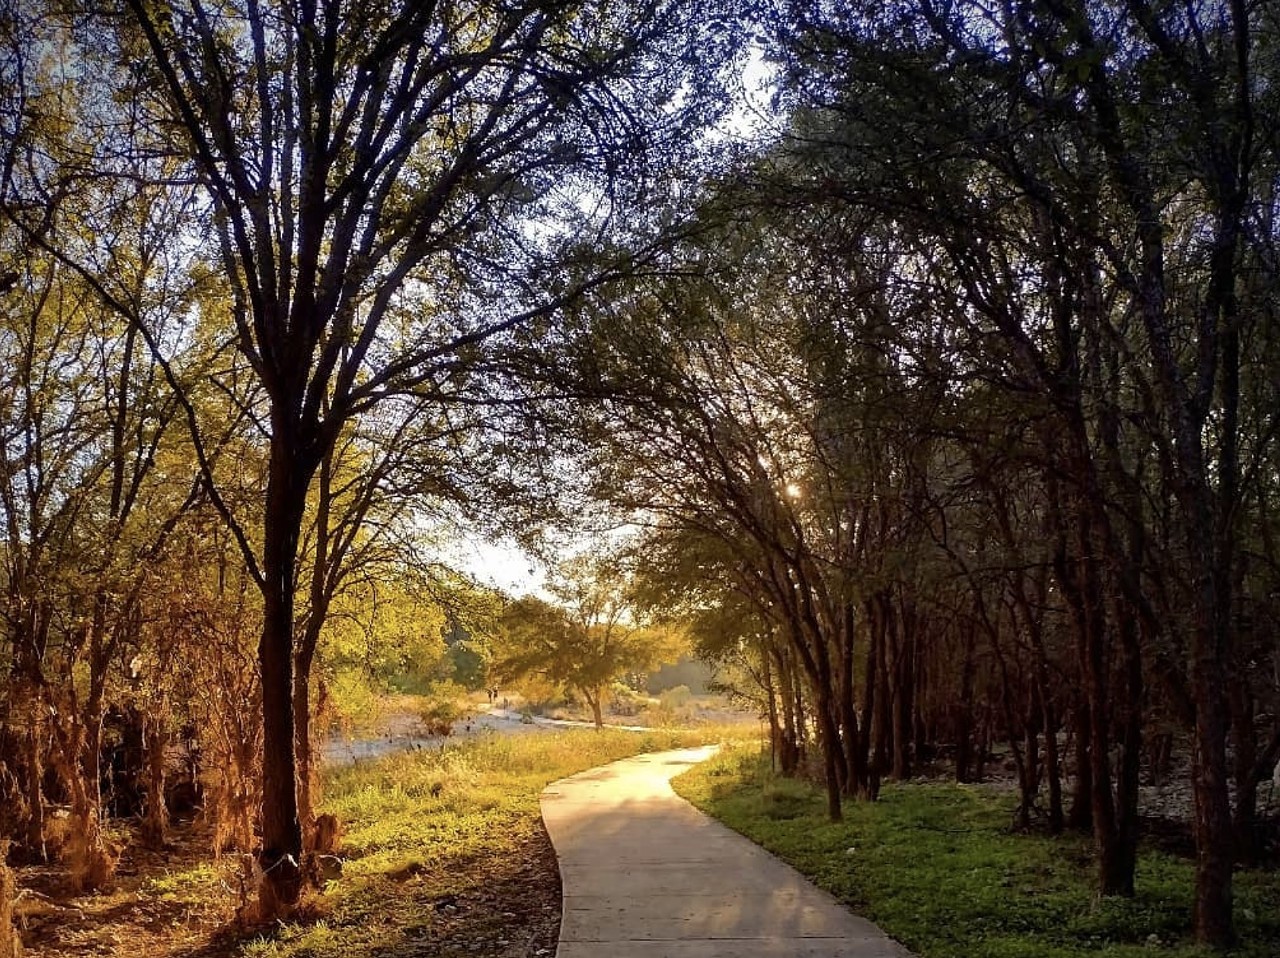 Cathedral Rock Park
8002 Grissom Road, (210) 207-7275, sanantonio.gov
Looking for a spot that gives serious nature vibes, but you don’t have to go far to get them? You’ll appreciate Cathedral Rock. Here you’ll be able to enjoy trails — whether you choose to bike or walk them — as well as big grassy areas and picnic tables too if you’re looking to sit back for a bit. There’s also playgrounds so the kids can run around.